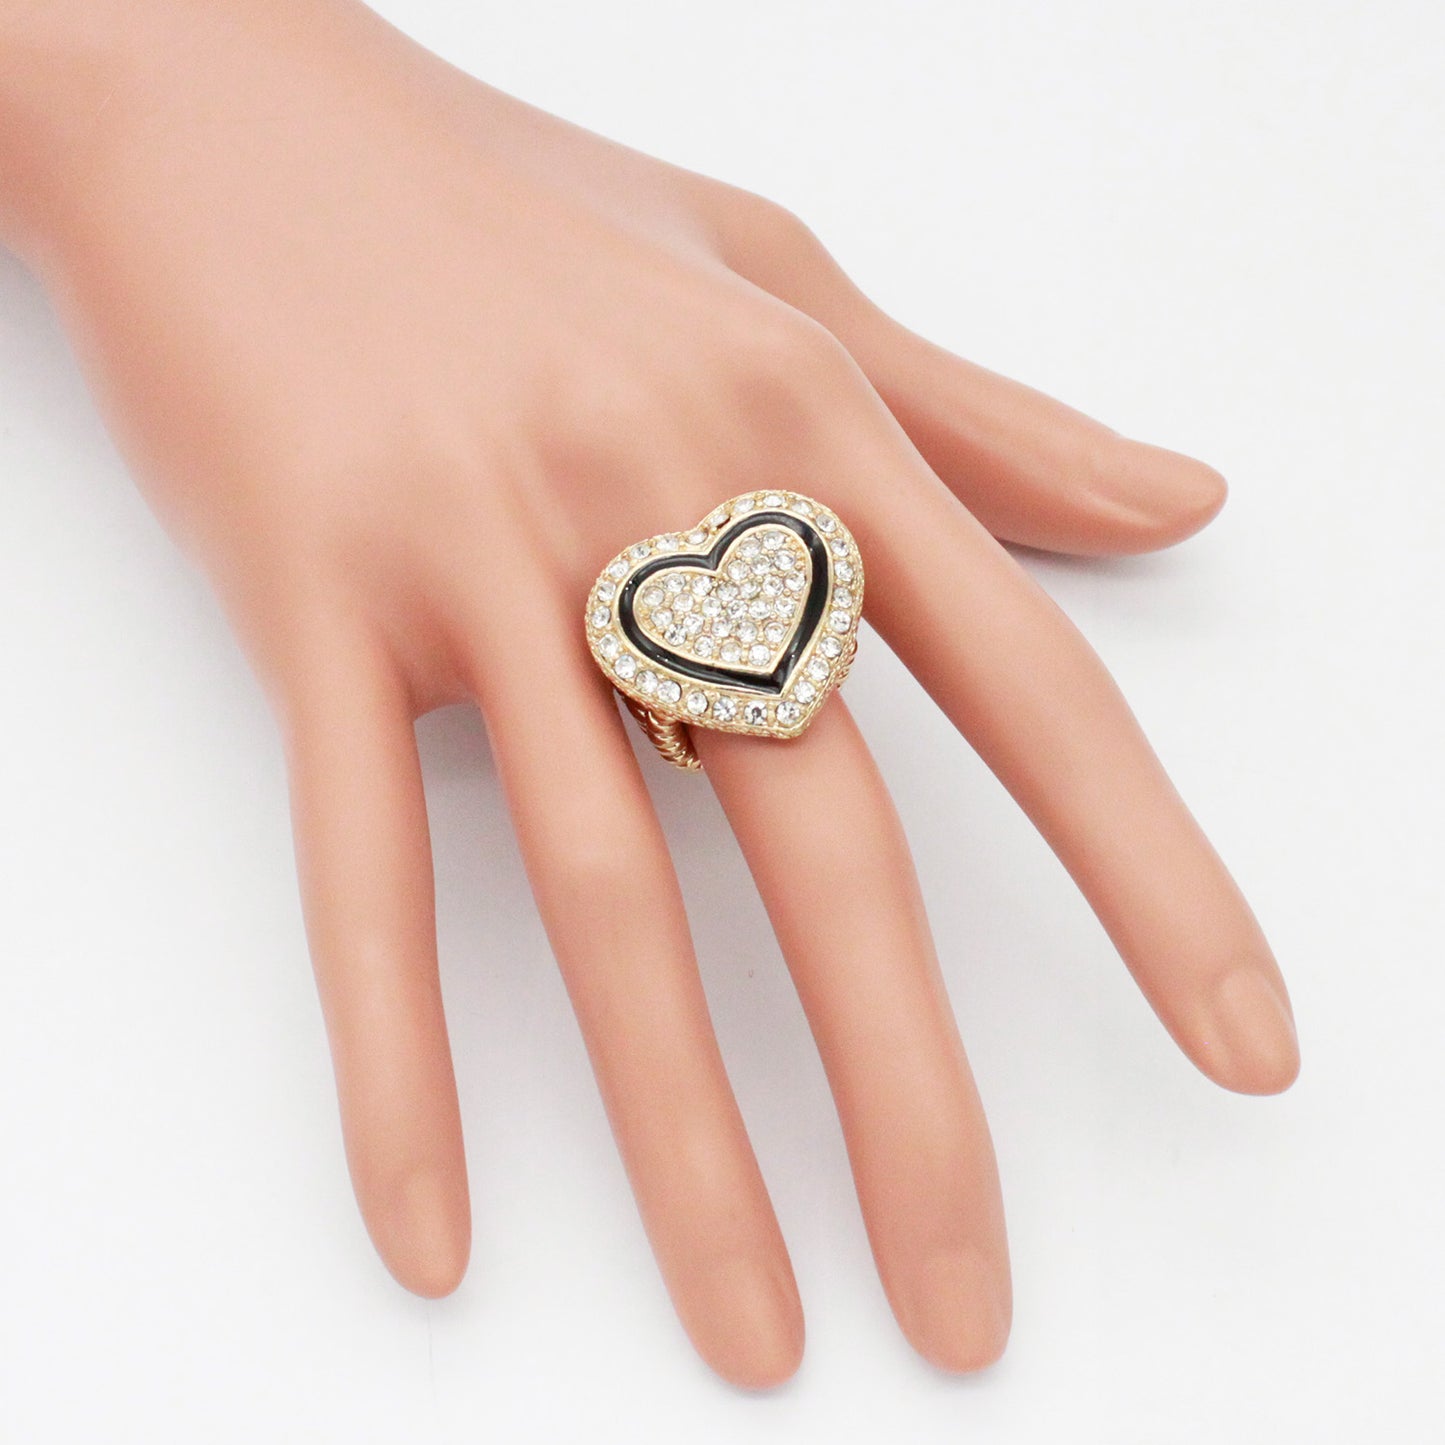 Lavencious Heart Shaped Rhinestones Stretch Rings for Women Size for 7-9(Gold Clear)